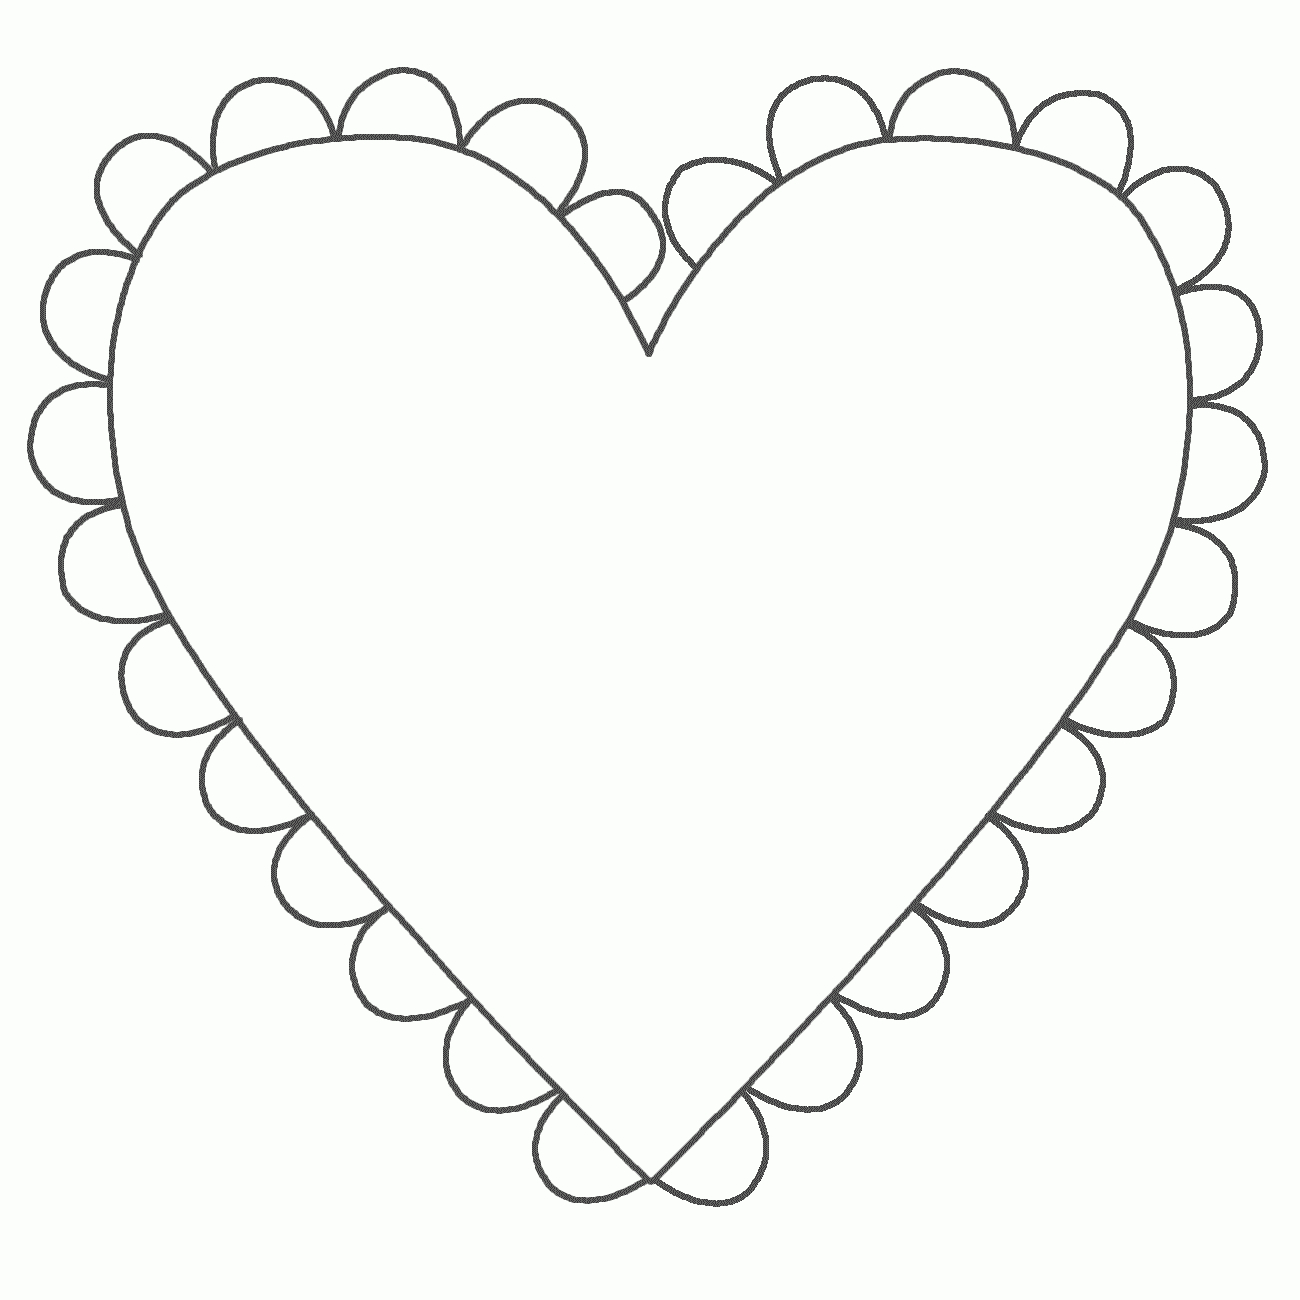 Free Heart Shapes Pictures, Download Free Clip Art, Free Clip Art On - Free Printable Hearts